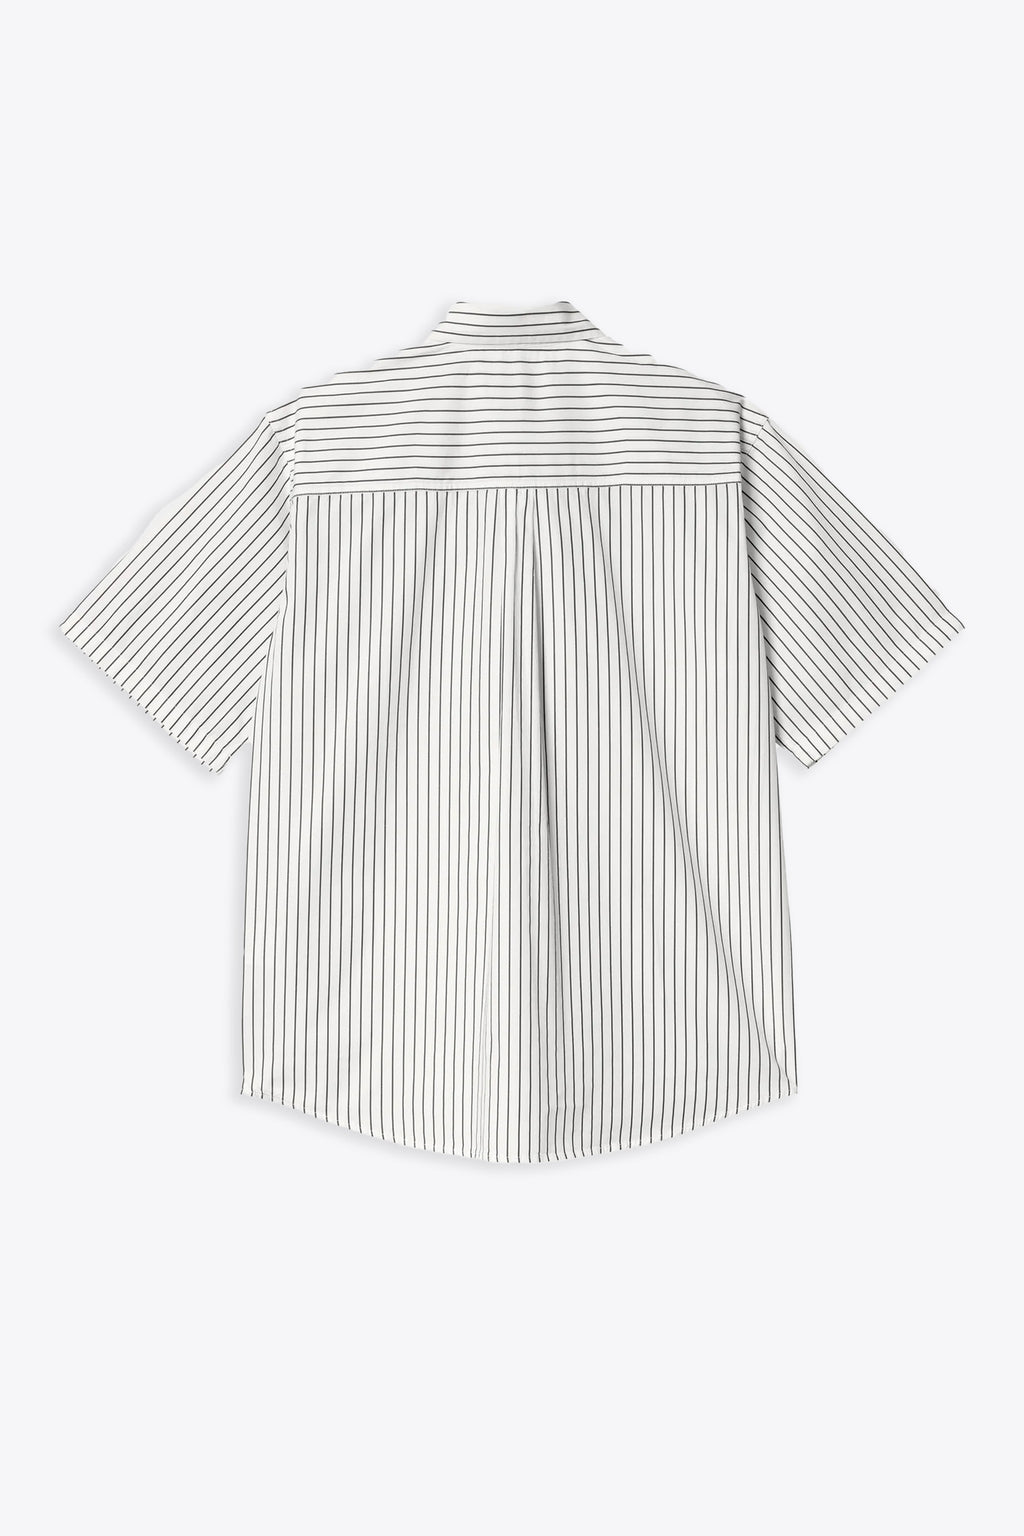 alt-image__White-and-black-striped-shirt-with-short-sleeves---S/S-Linus-Shirt